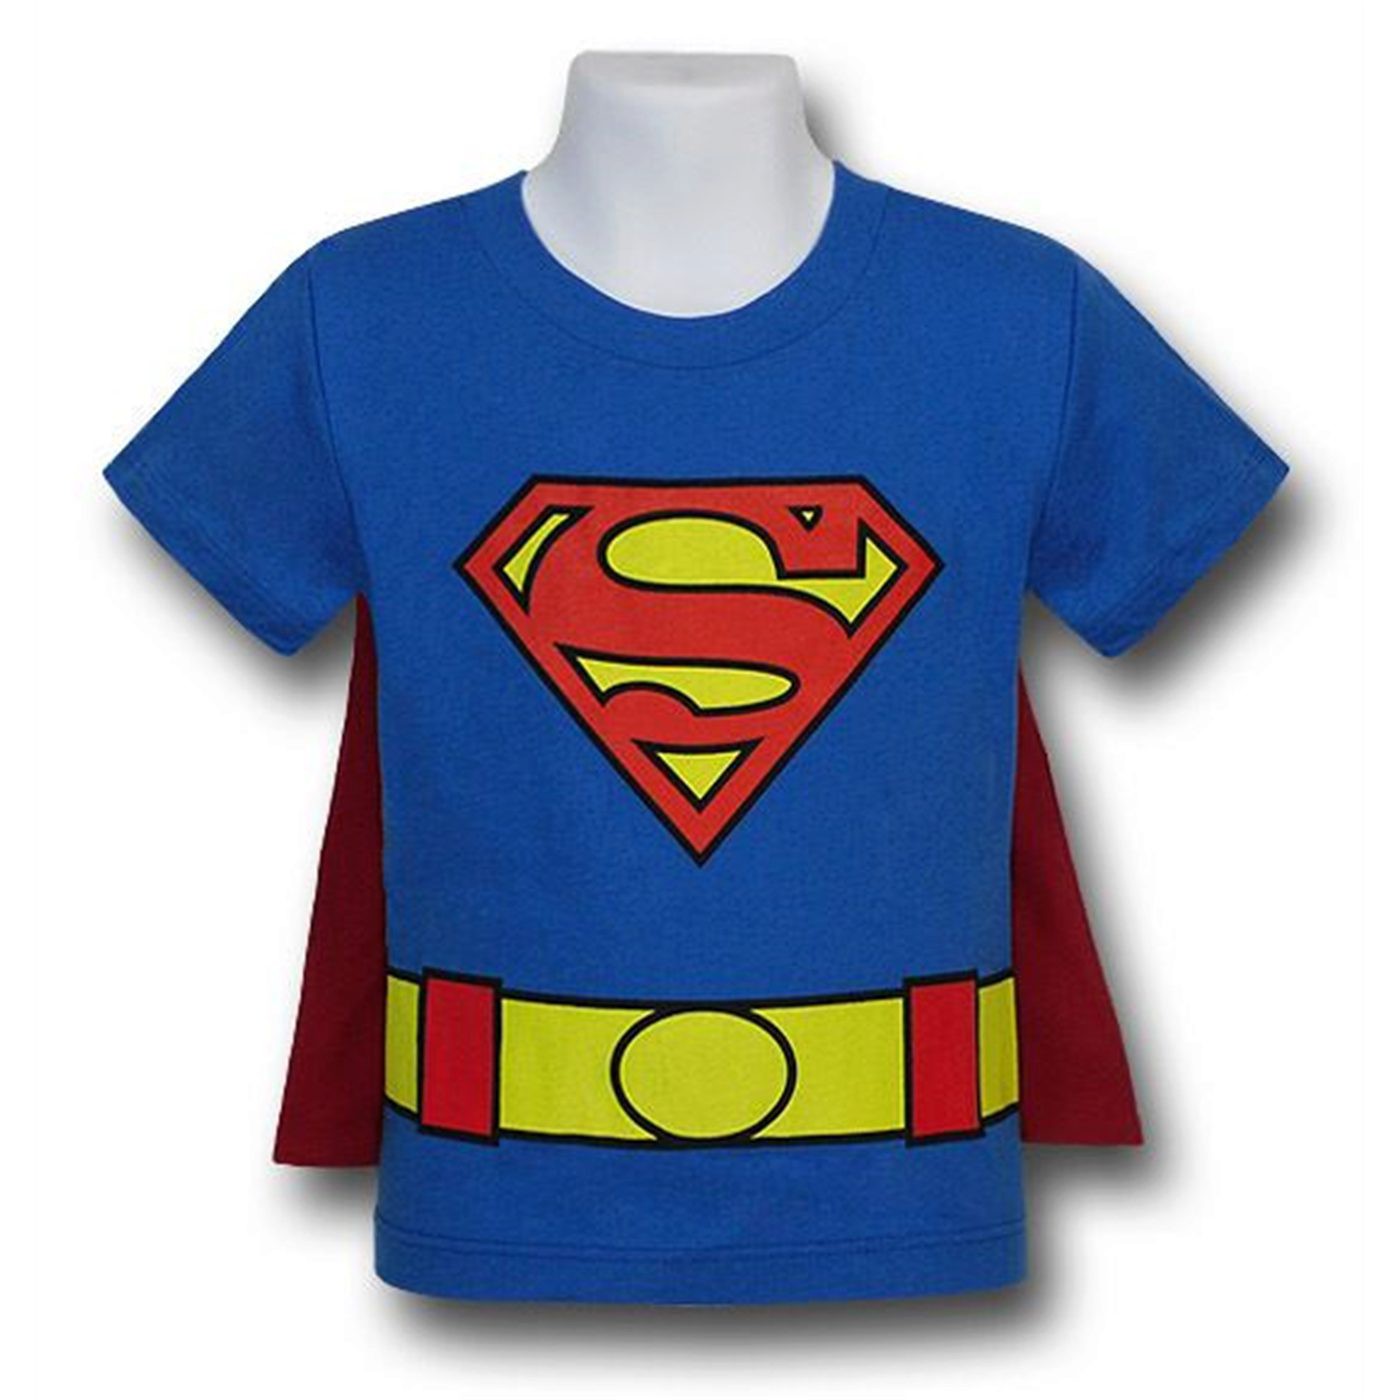 Superman Costume t-shirt Childs size 6-7 8 10-12 14-16 New two sided tee 